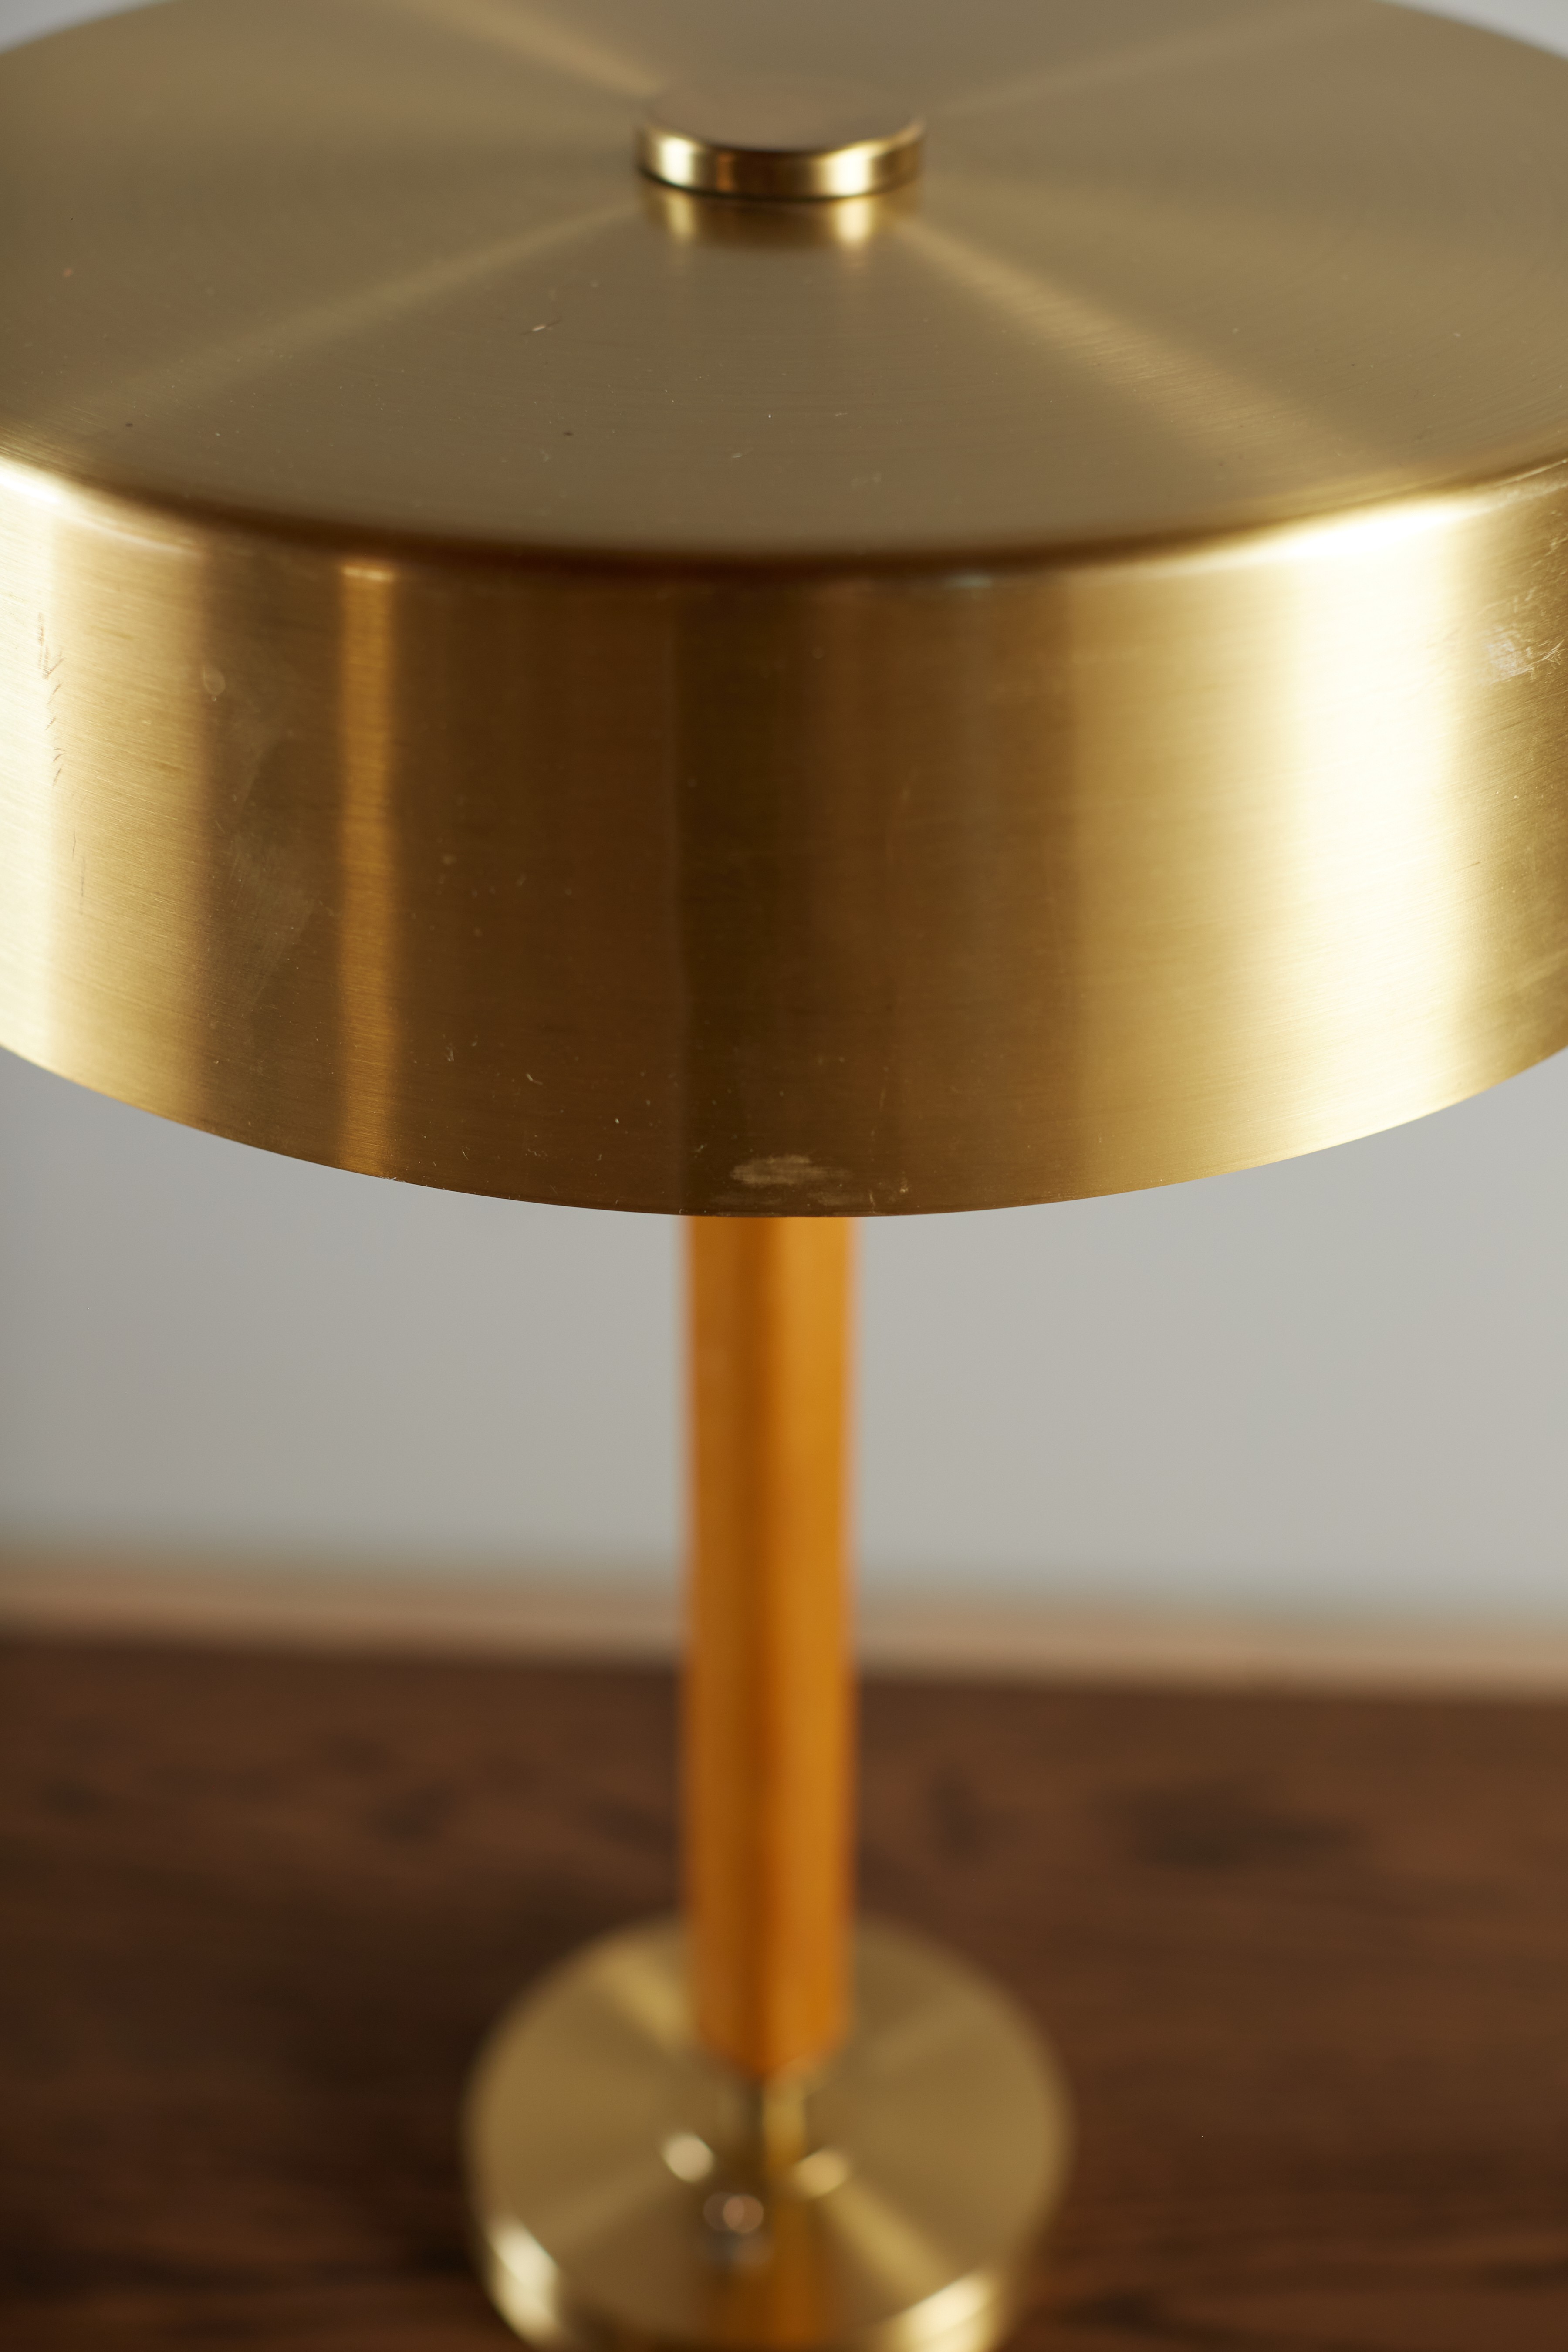 a gold plate on a wooden table with a wooden base